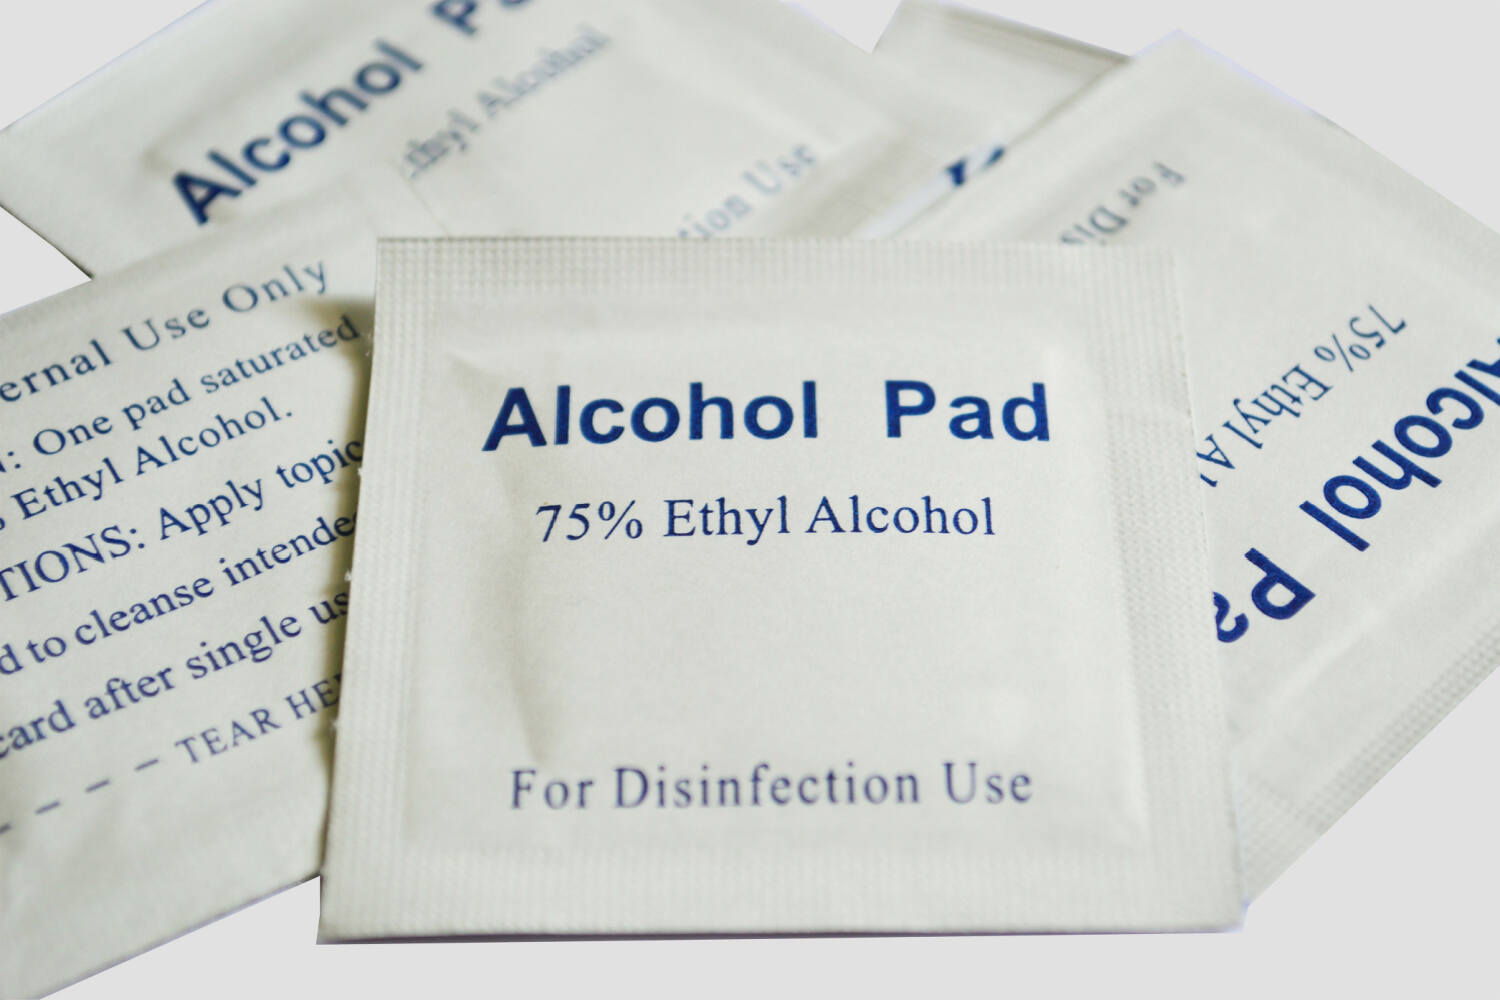 Alcohol wipes are useful for cleaning a wound